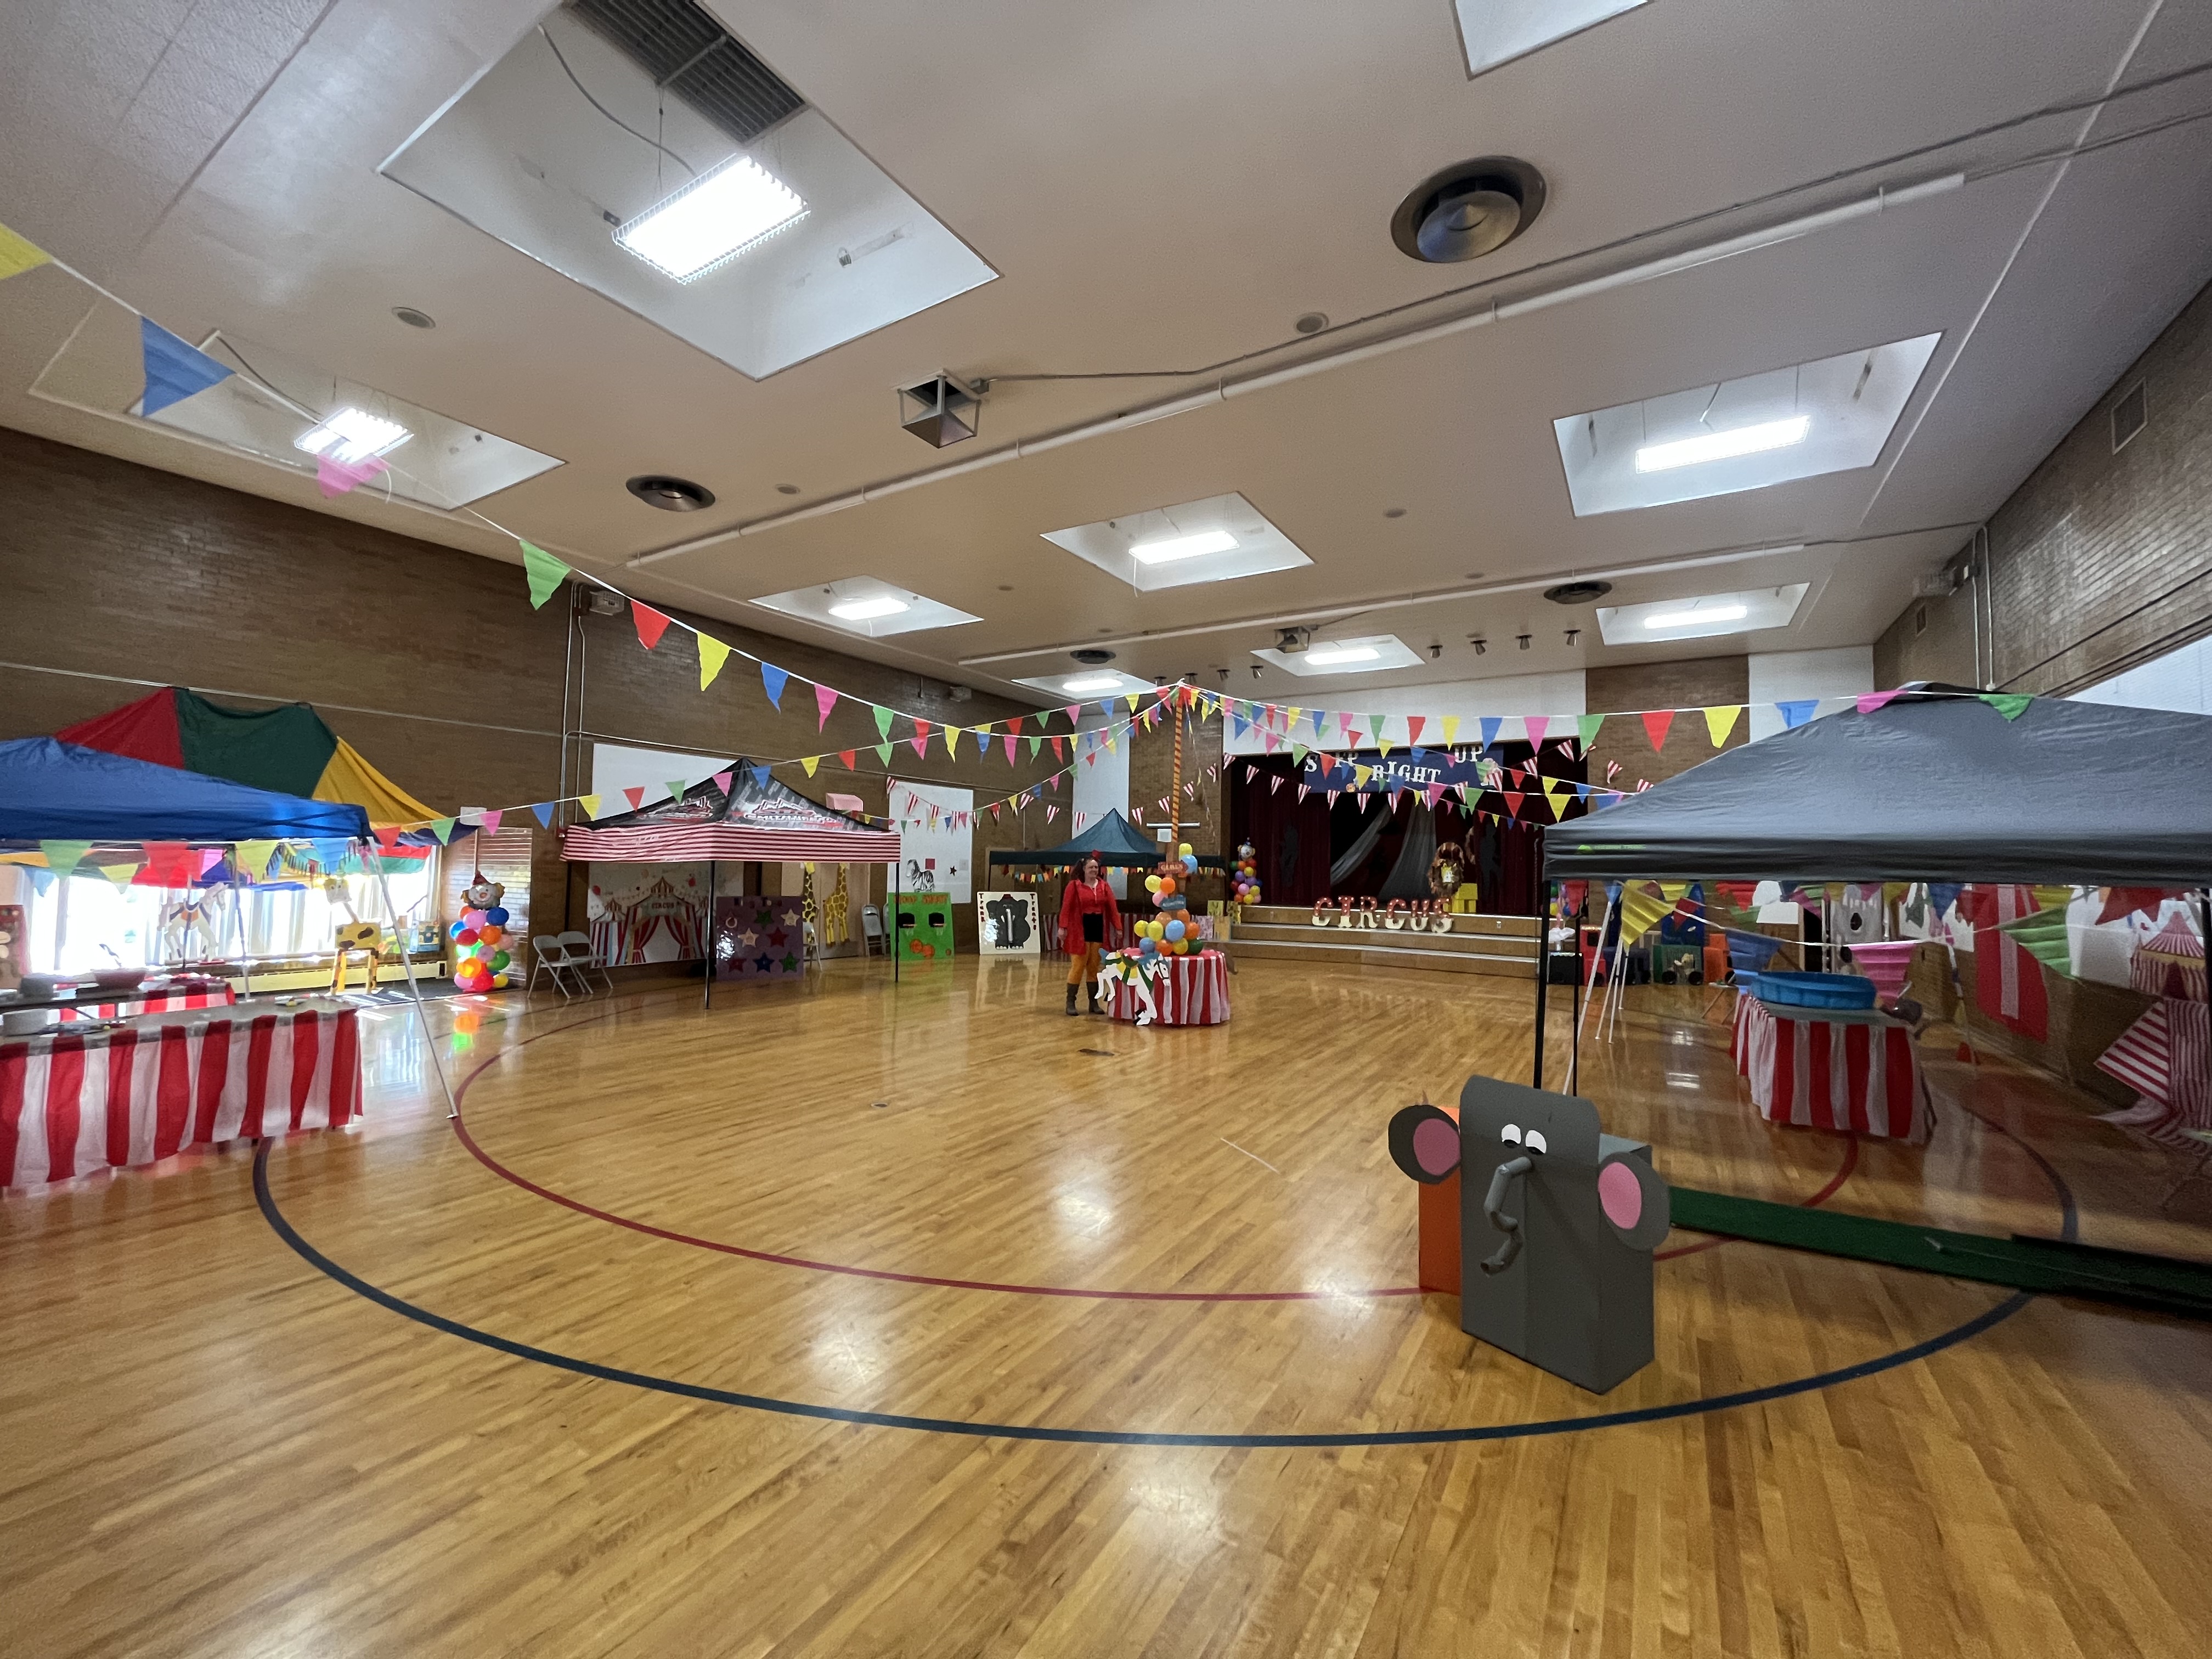 South gym decorated for the circus reading celebration